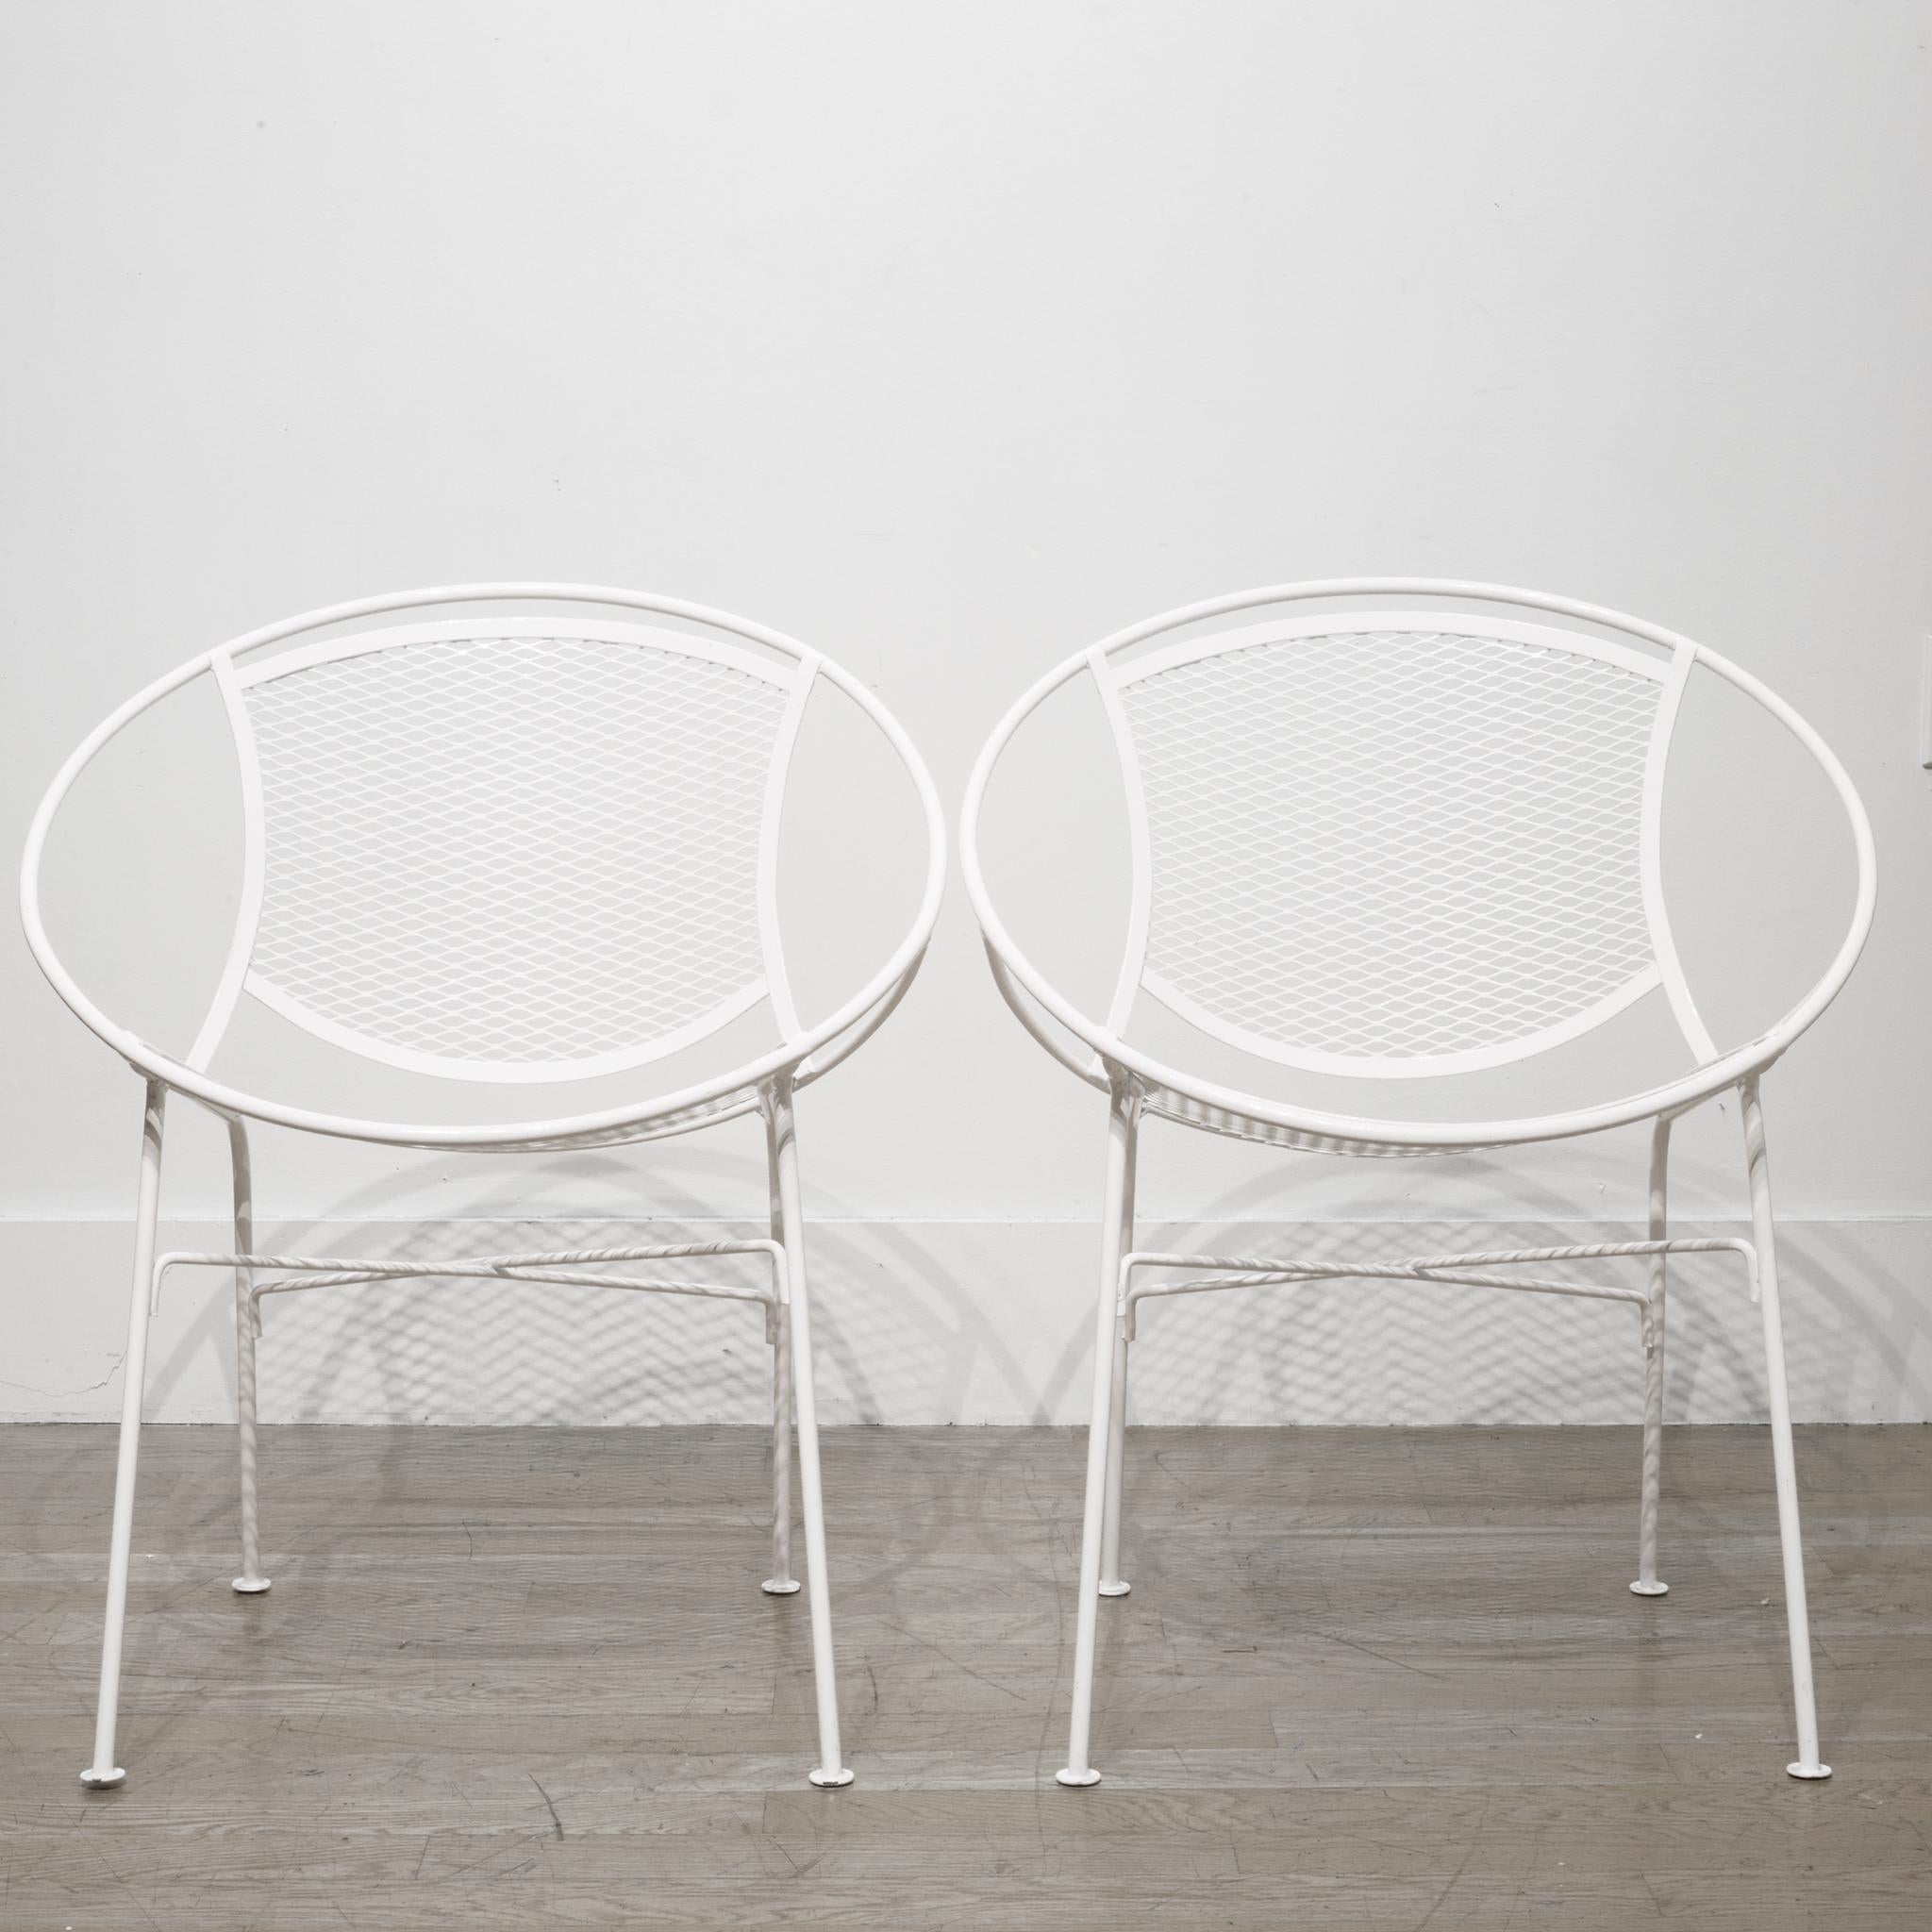 About

Price is for the pair.

A pair of white powder coated wrought iron patio chair with mesh bodies. Possibly restored several years ago.

Creator: Maurizio Tempestini for John Salterini.
Date of manufacture: circa 1960-1969.
Materials